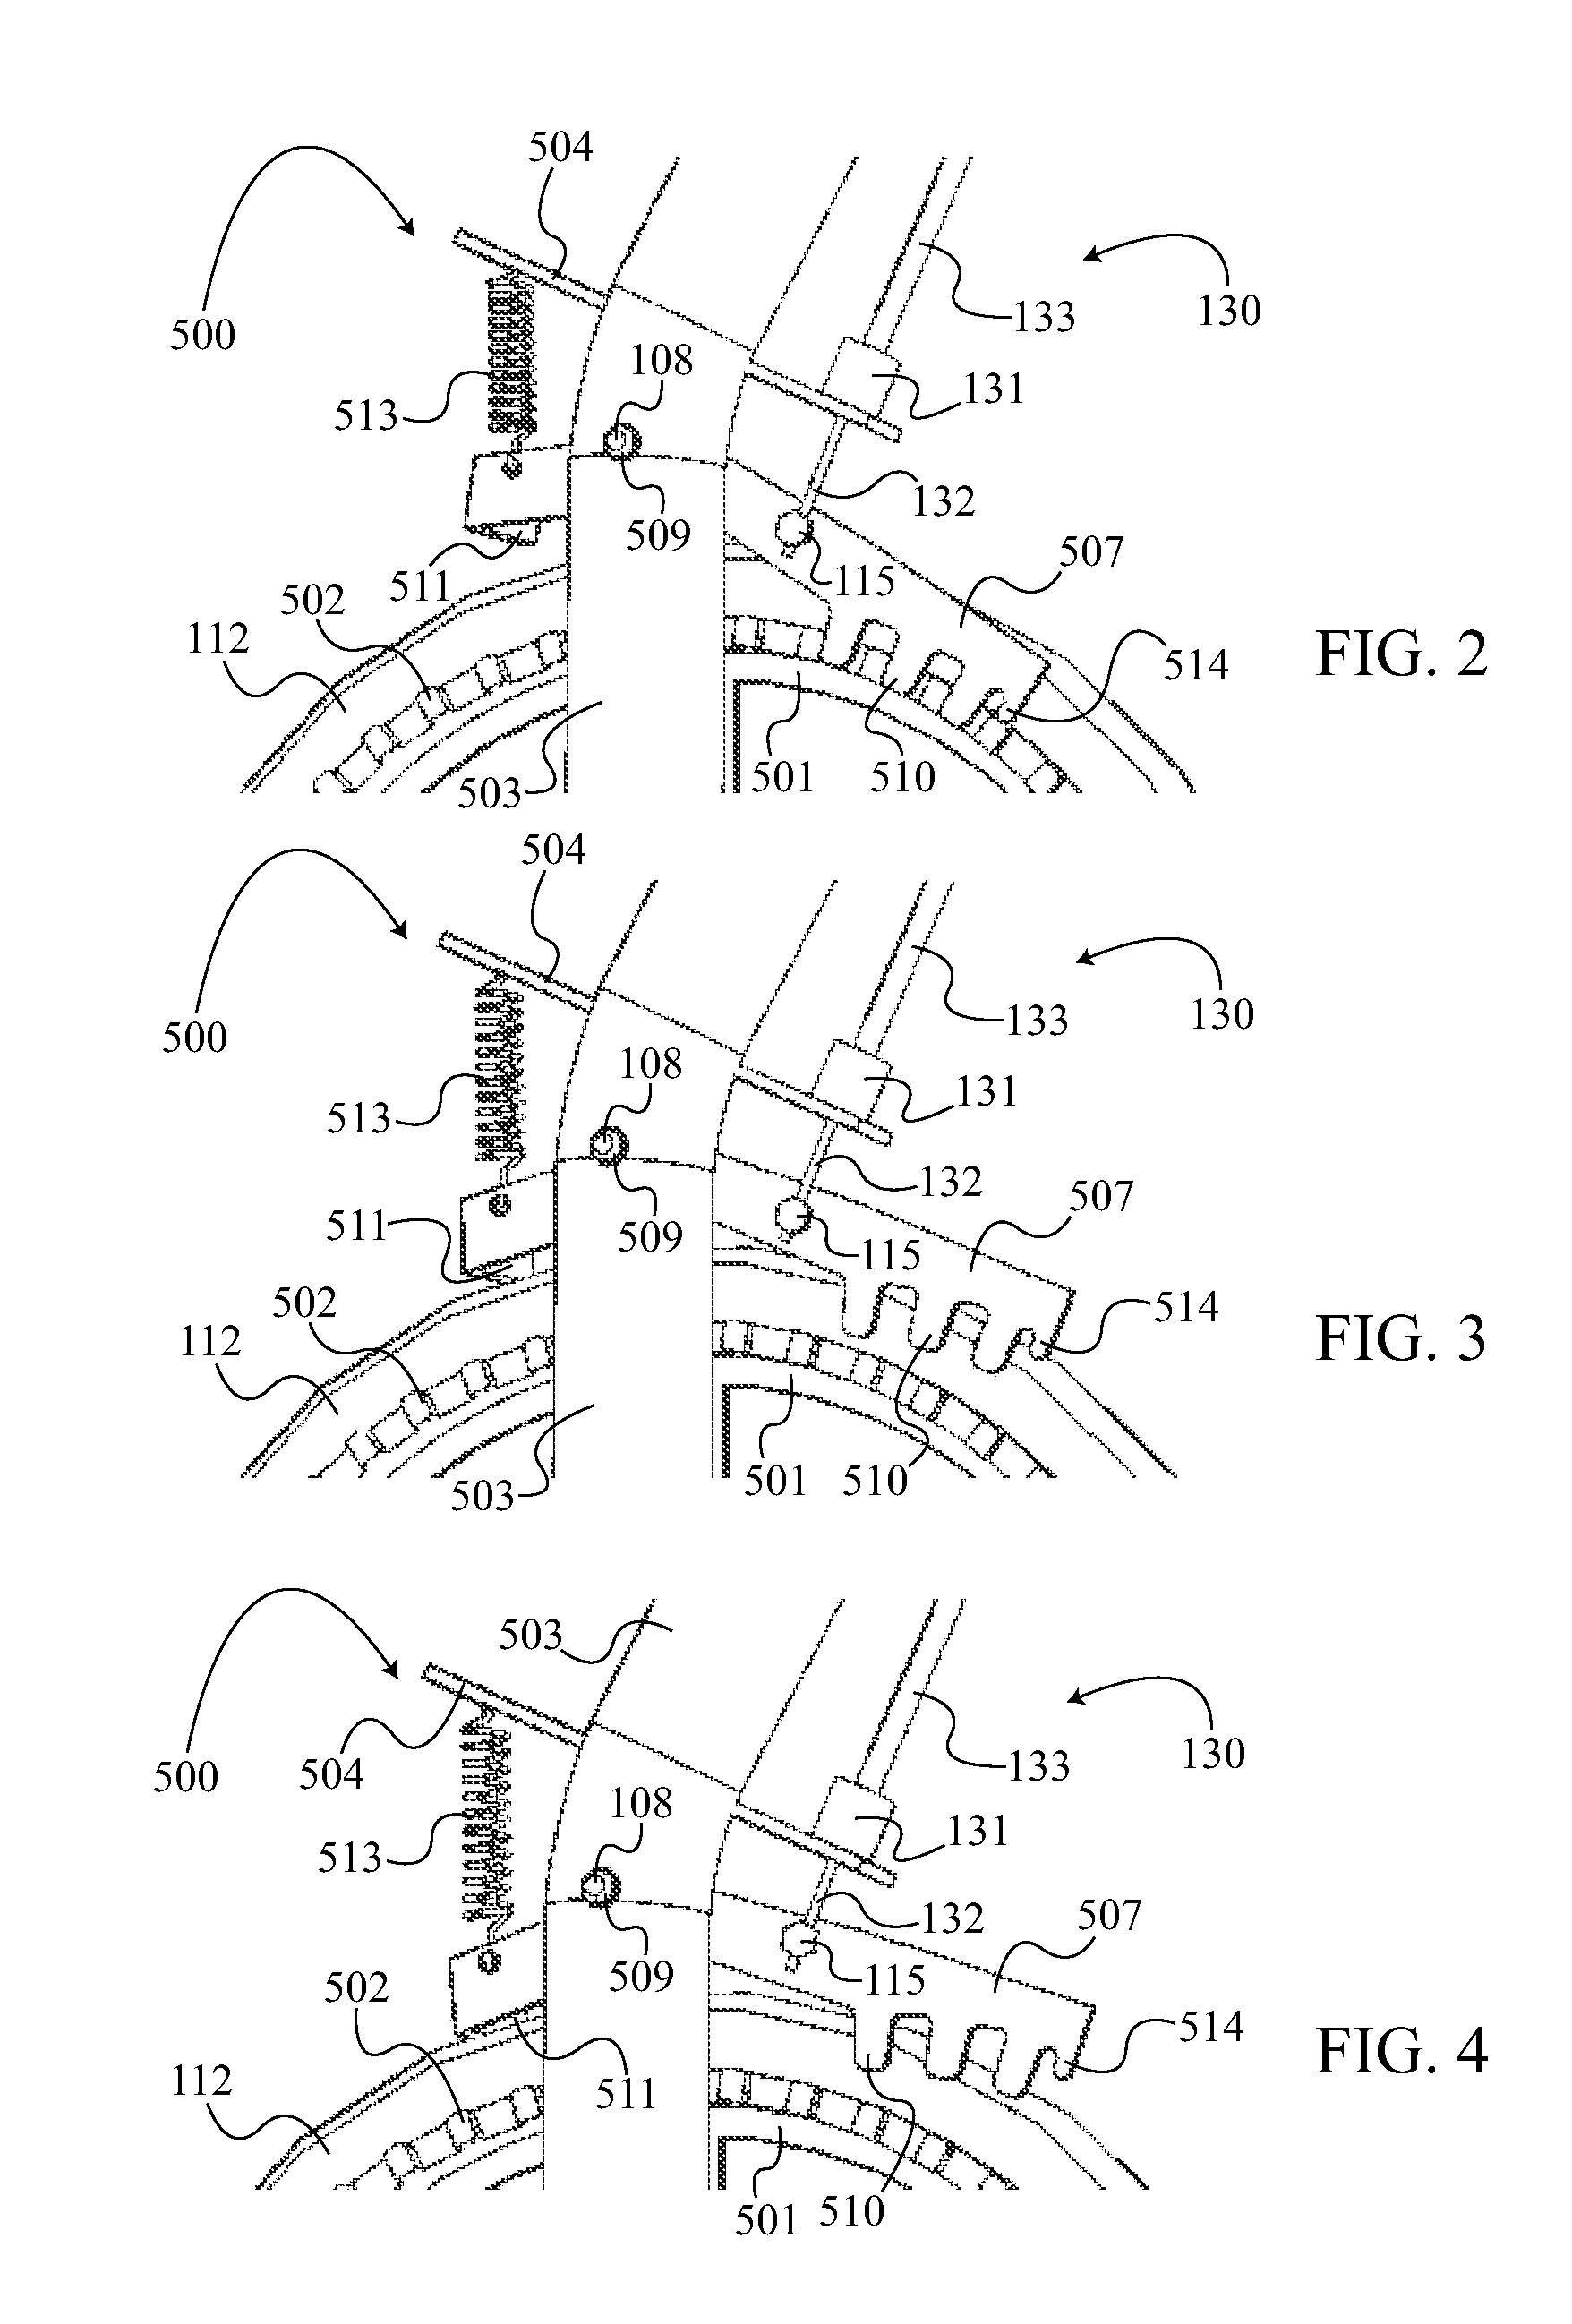 Safety braking system for a hand-pushed rollator